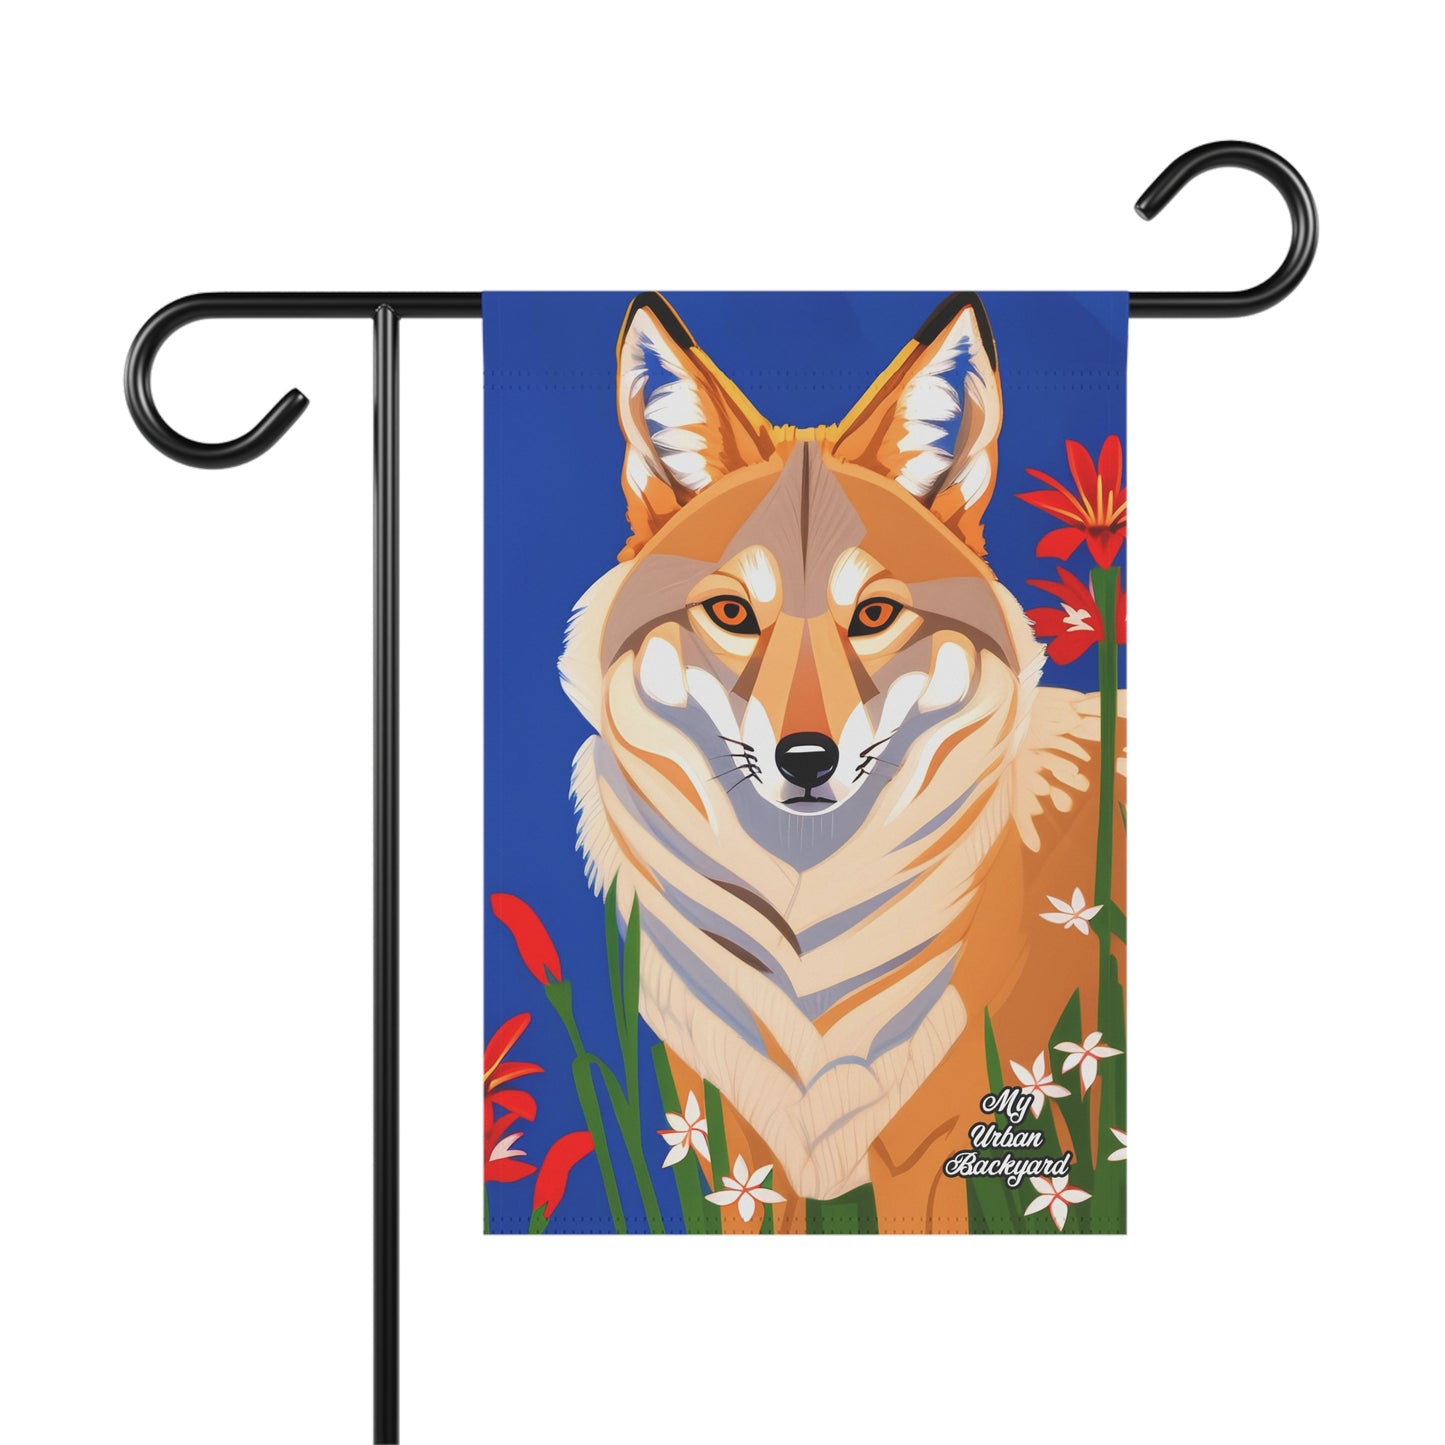 Coyote and Red Flowers, Garden Flag for Yard, Patio, Porch, or Work, 12"x18" - Flag only